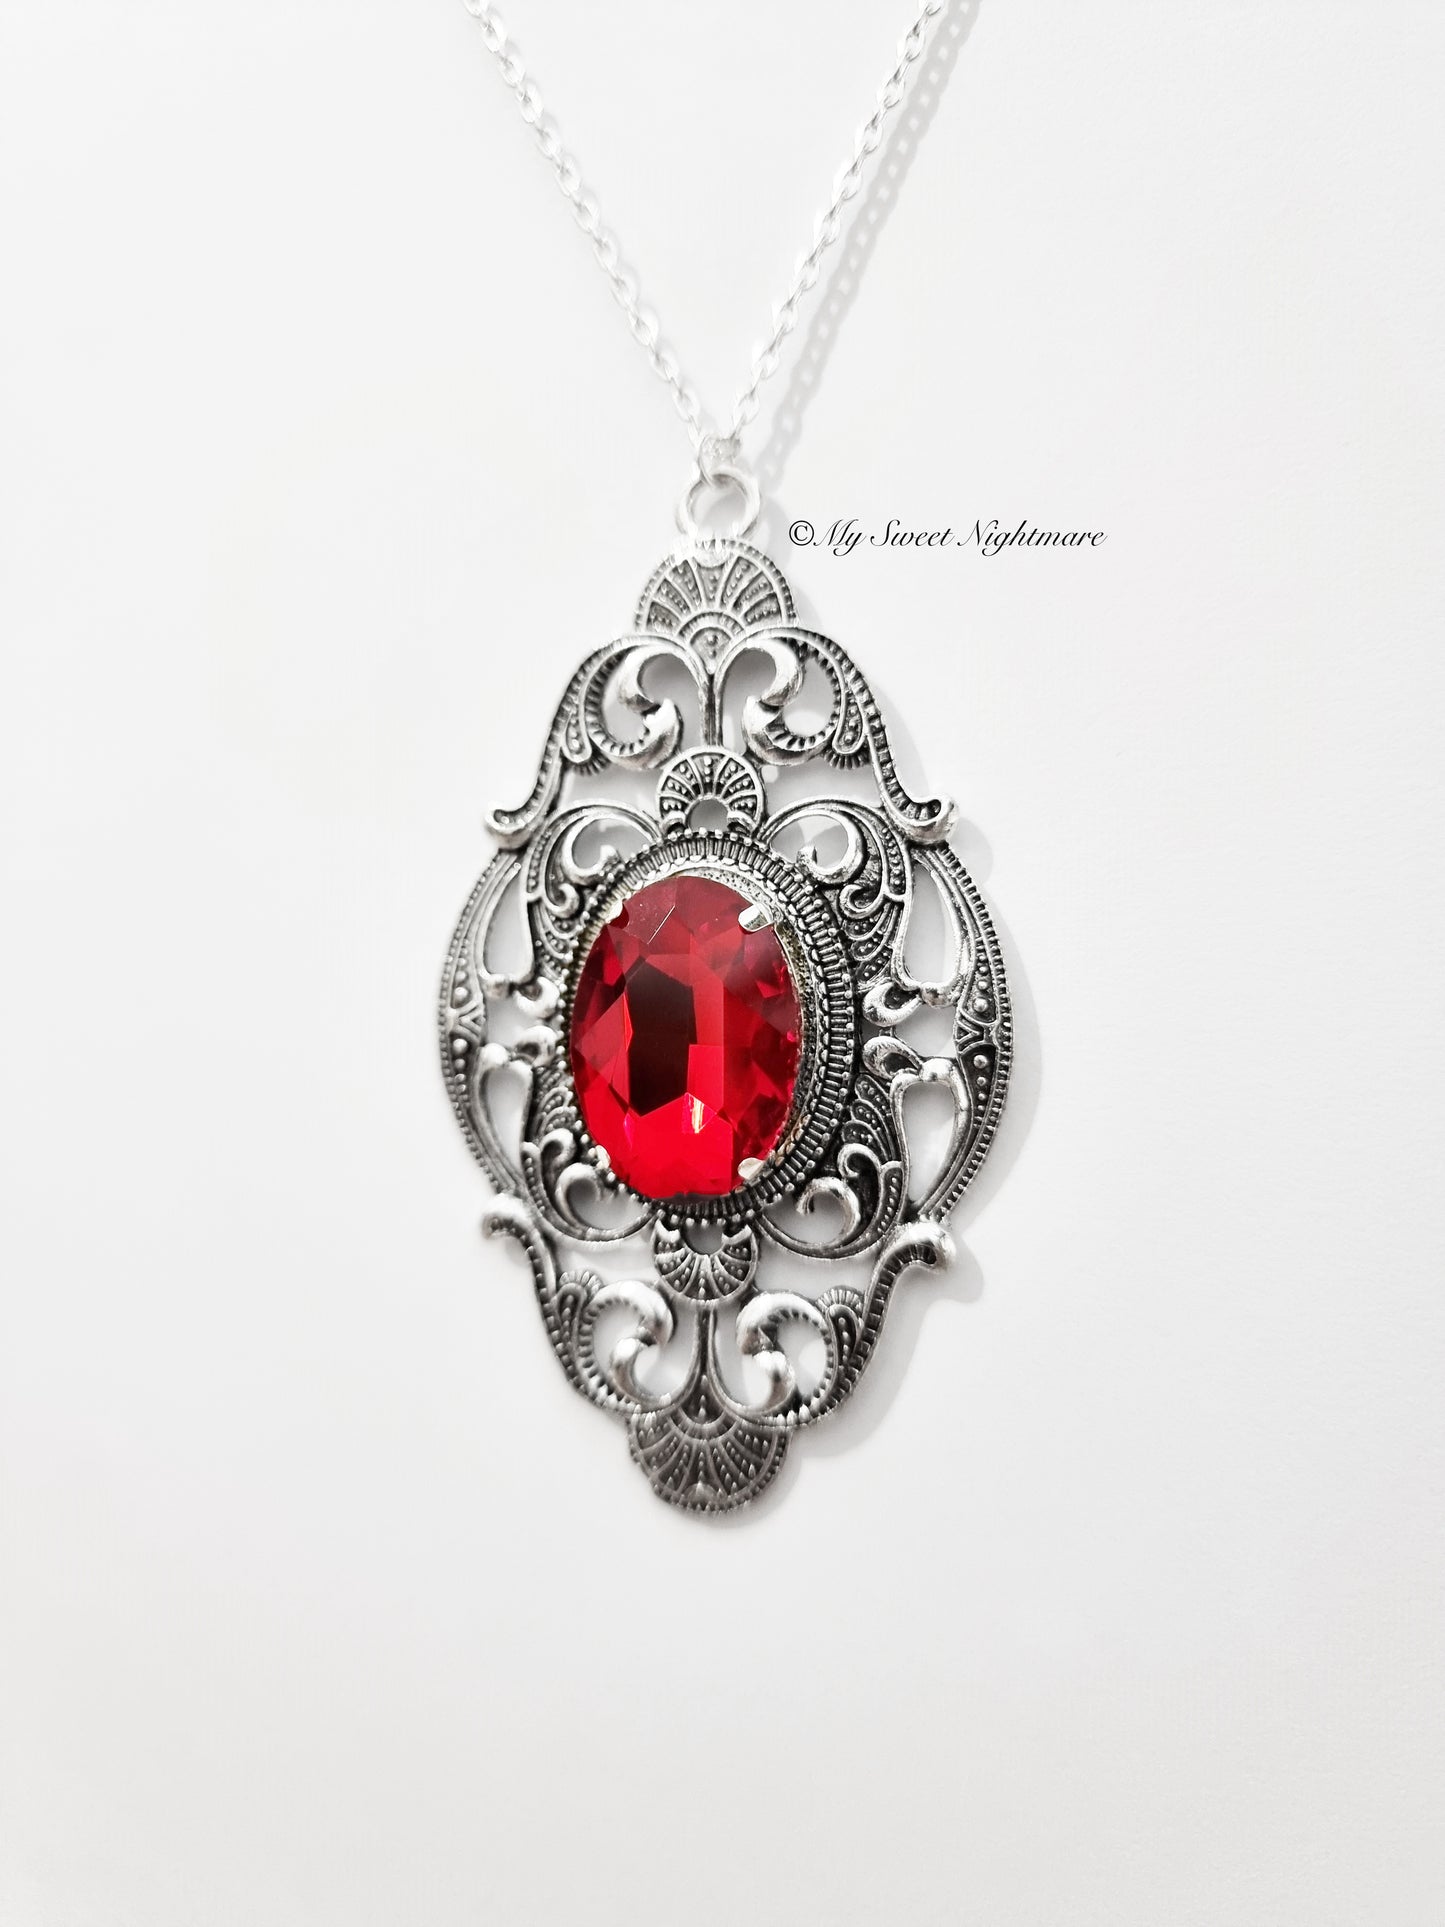 Victorian Necklace with Red Gem